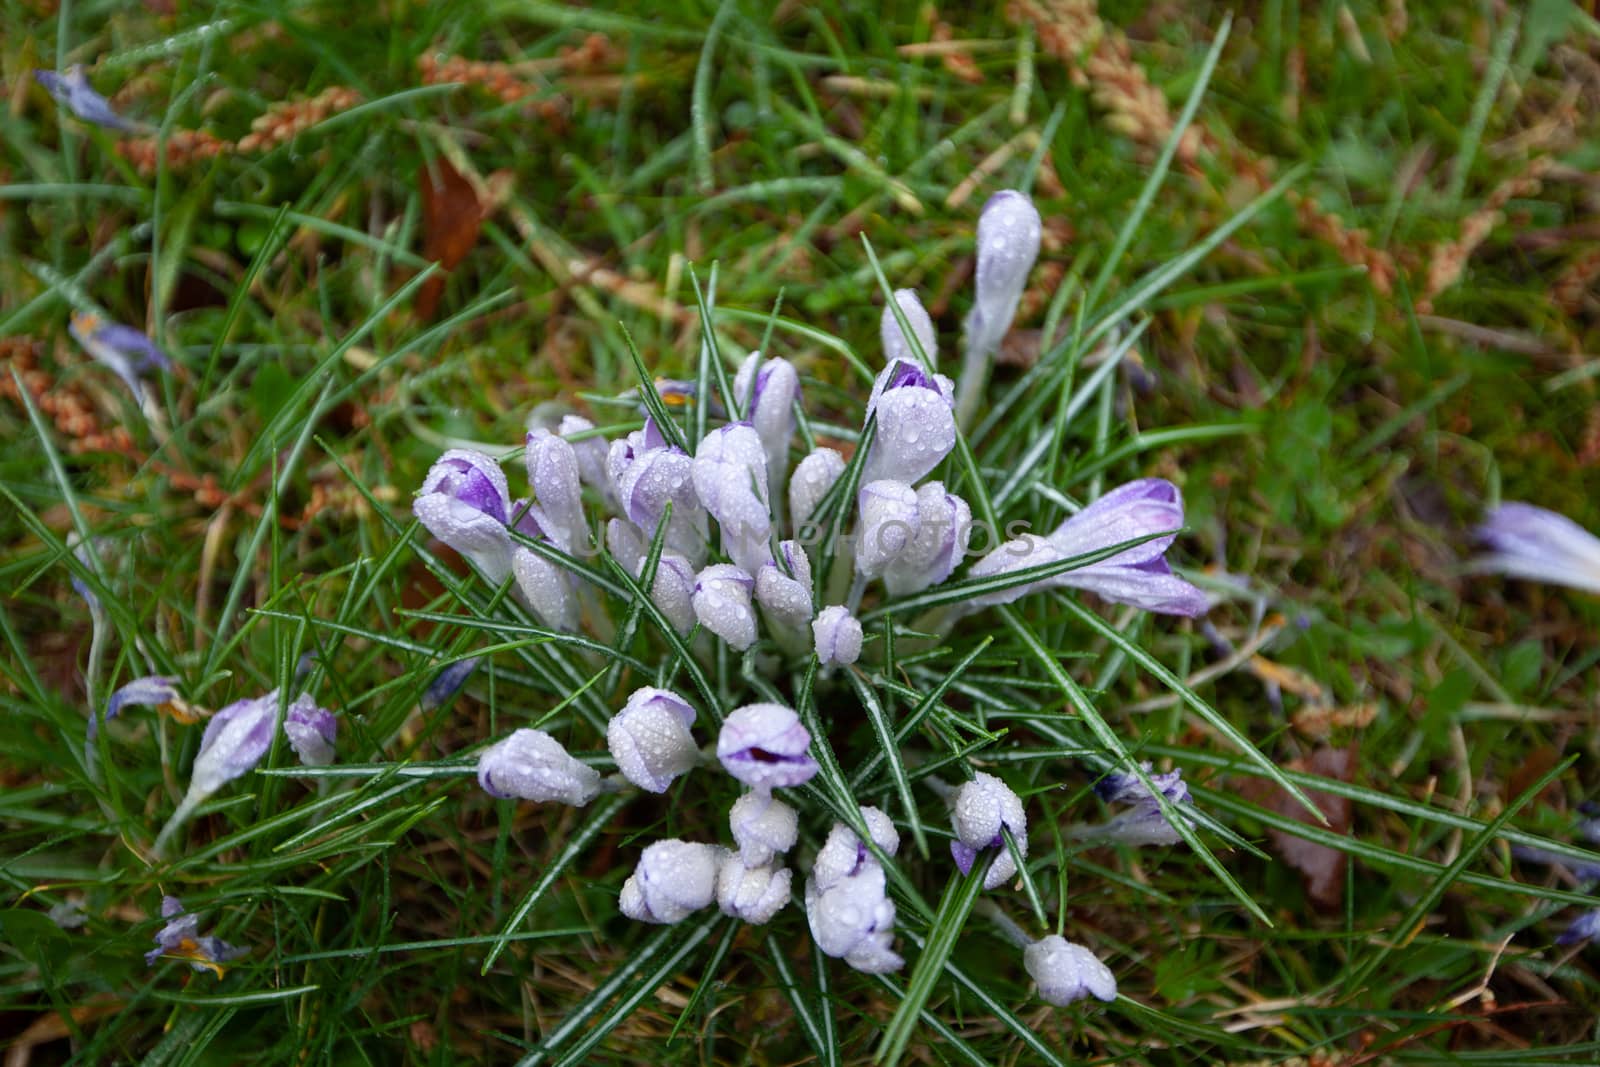 Flowers of Crocus covered with dew in March at Flora Botanical Garden, Cologne, Germany